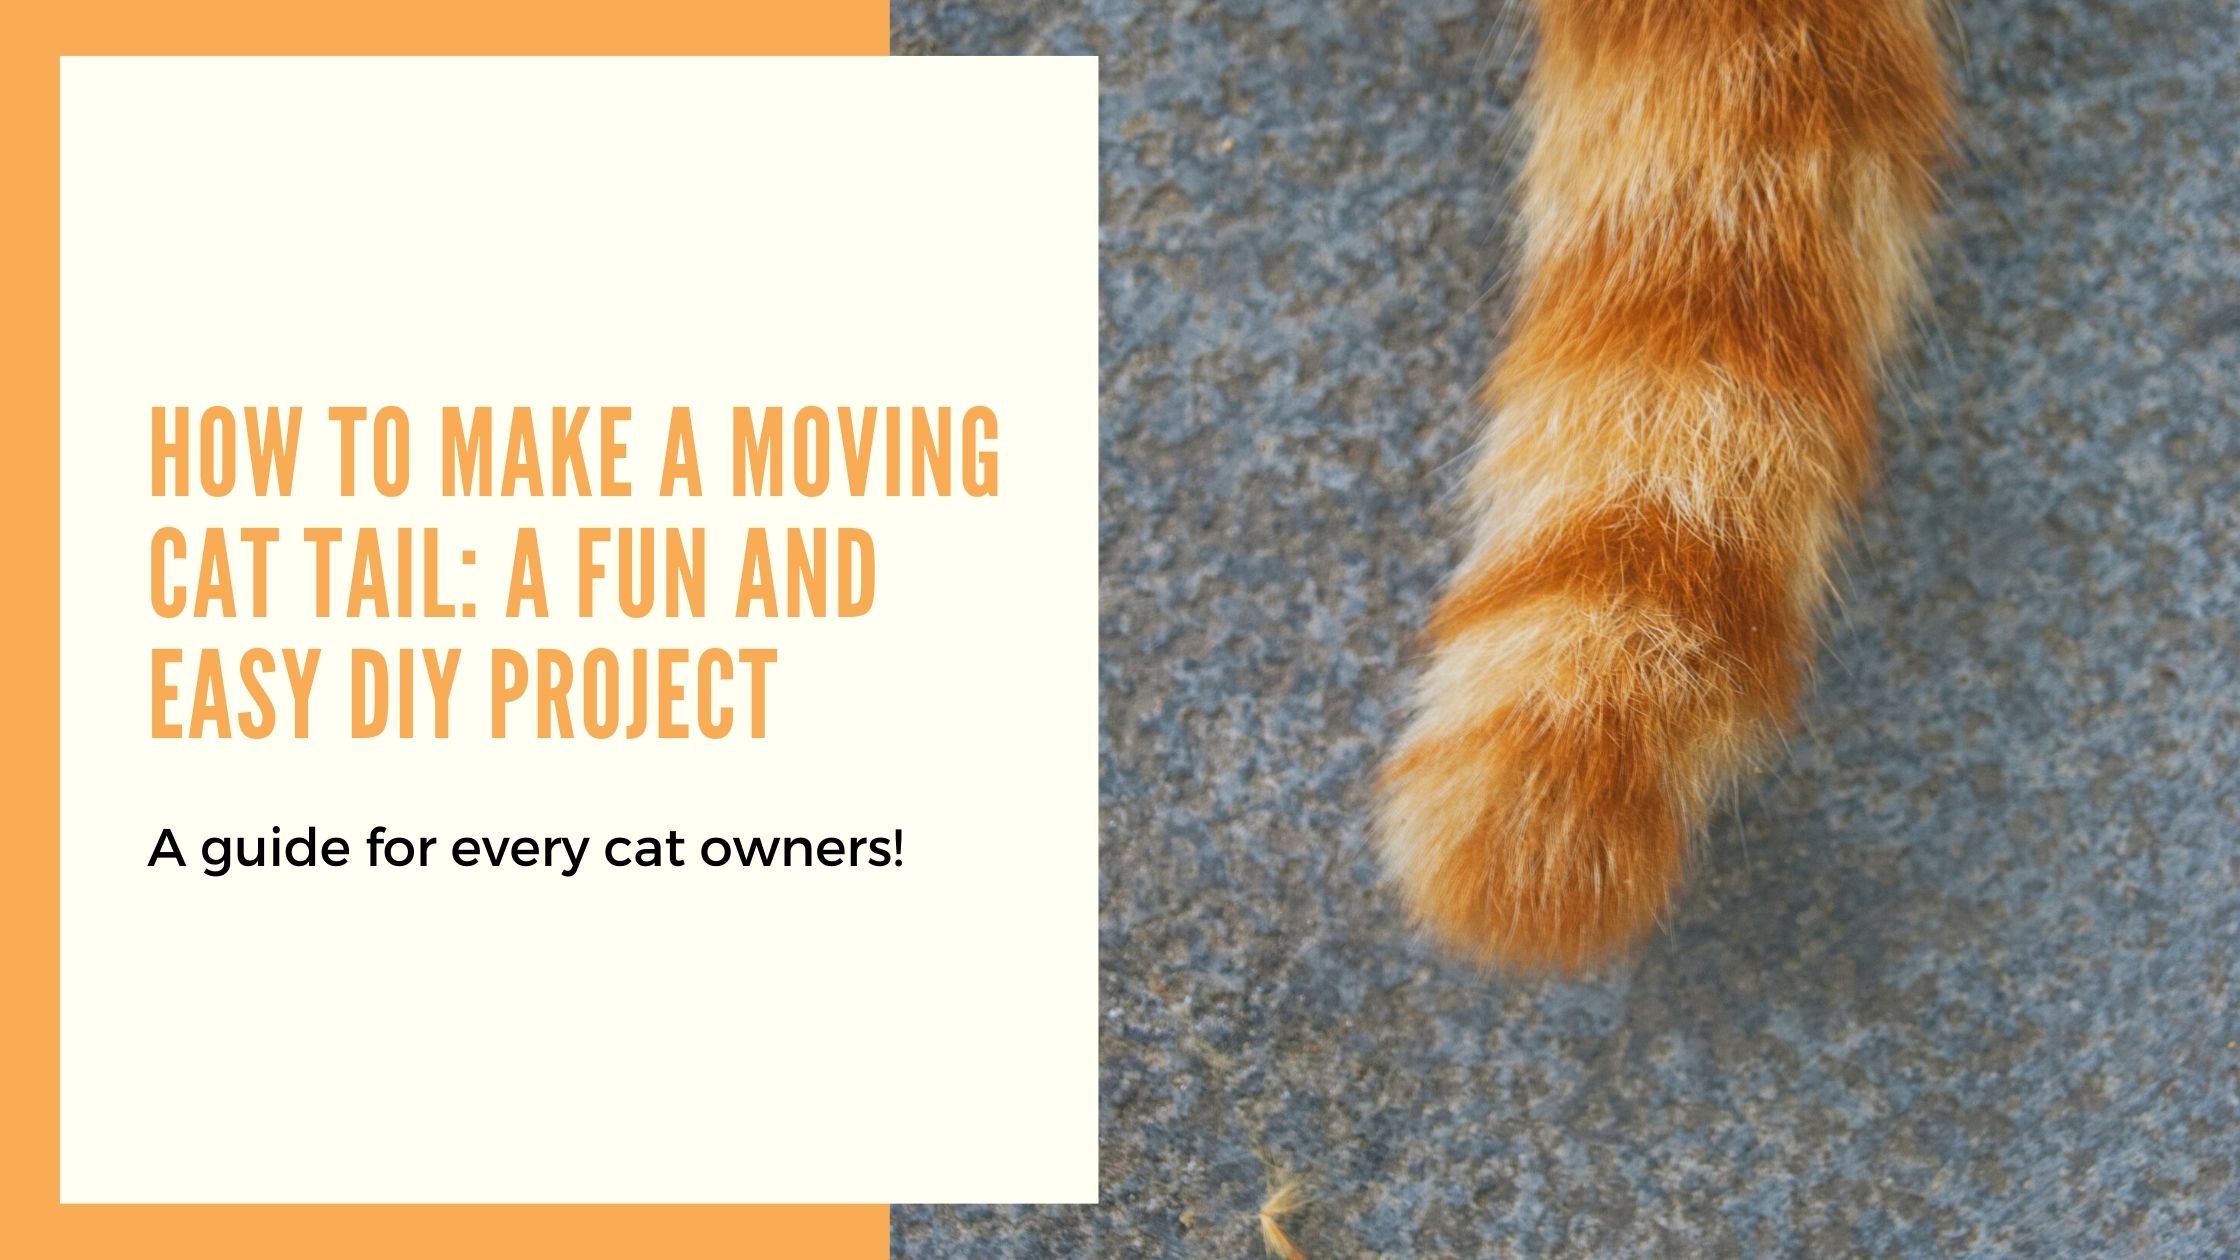 How to Make a Moving Cat Tail